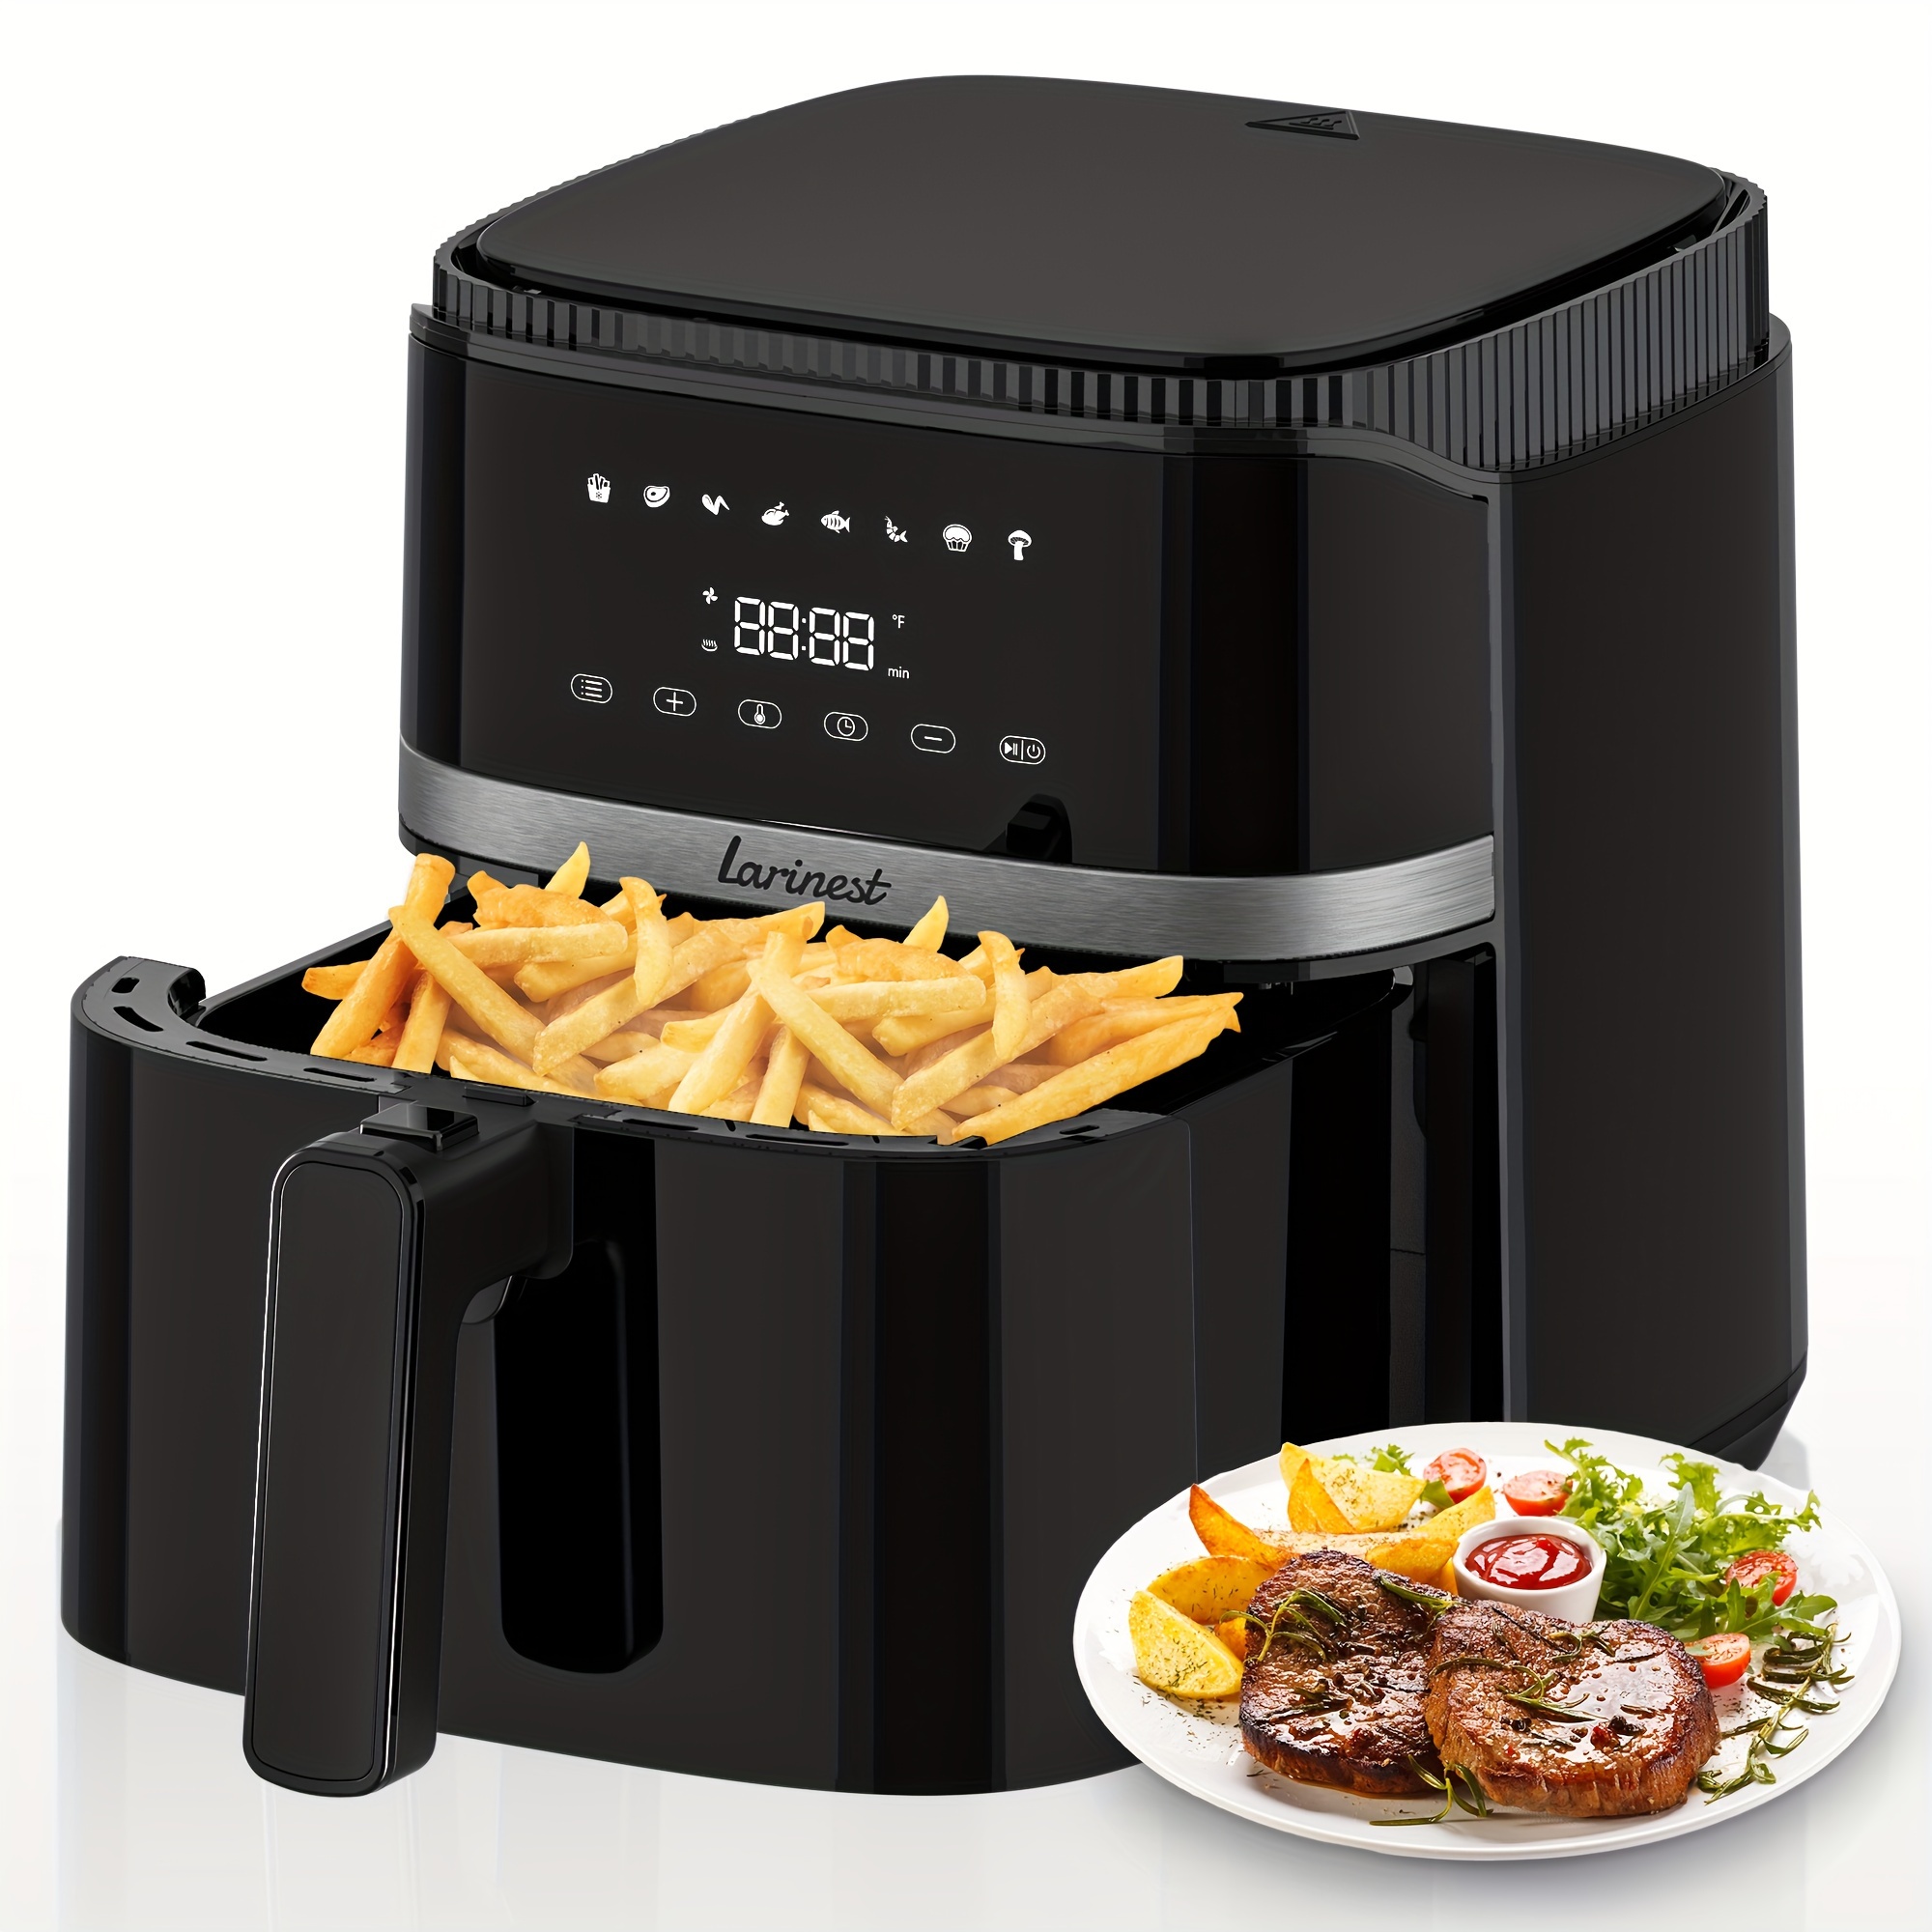 

Air Fryer 5.3qt, 8 Cooking Presets Airfryer For Quick Easy Meals, Compact Air Fryer With Nonstick Basket Dishwasher-safe, Fit For 3-5 People, Auto Shutoff, Black